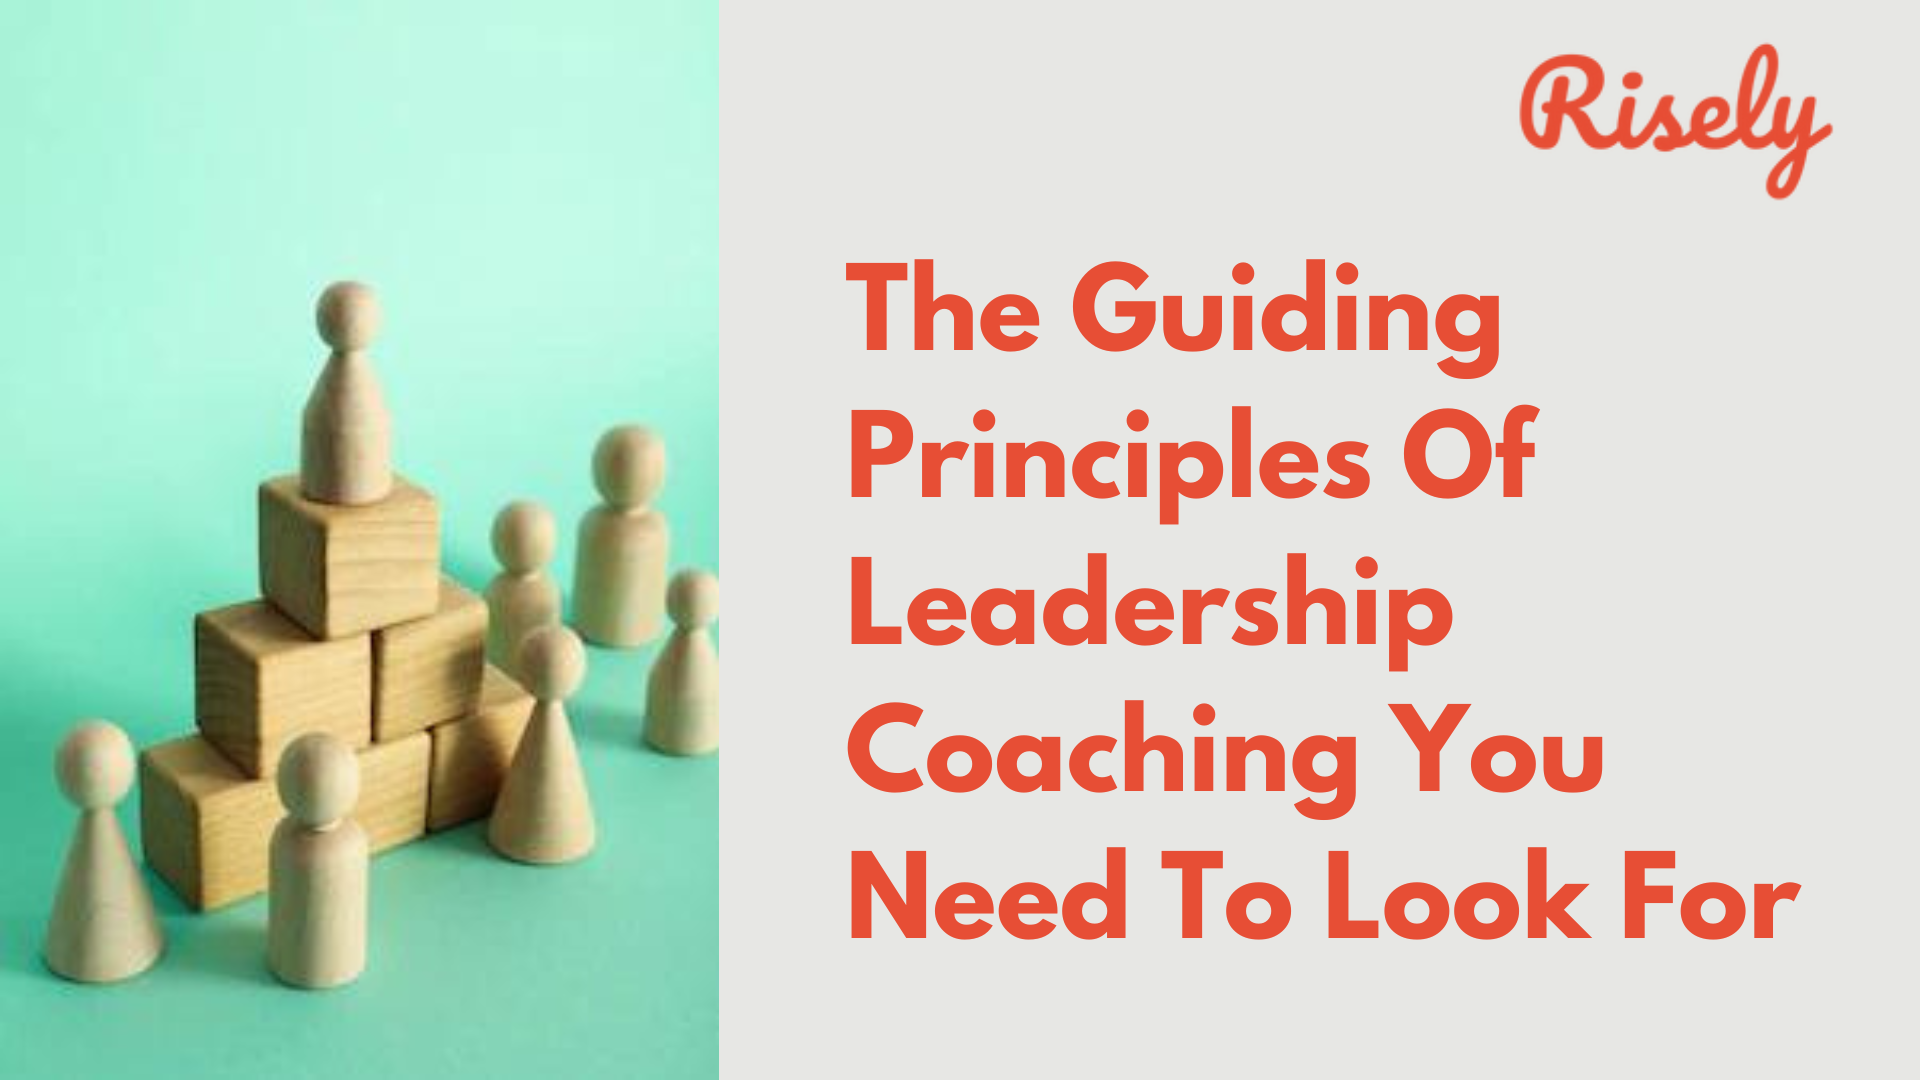 The Guiding Principles Of Leadership Coaching You Need To Look For